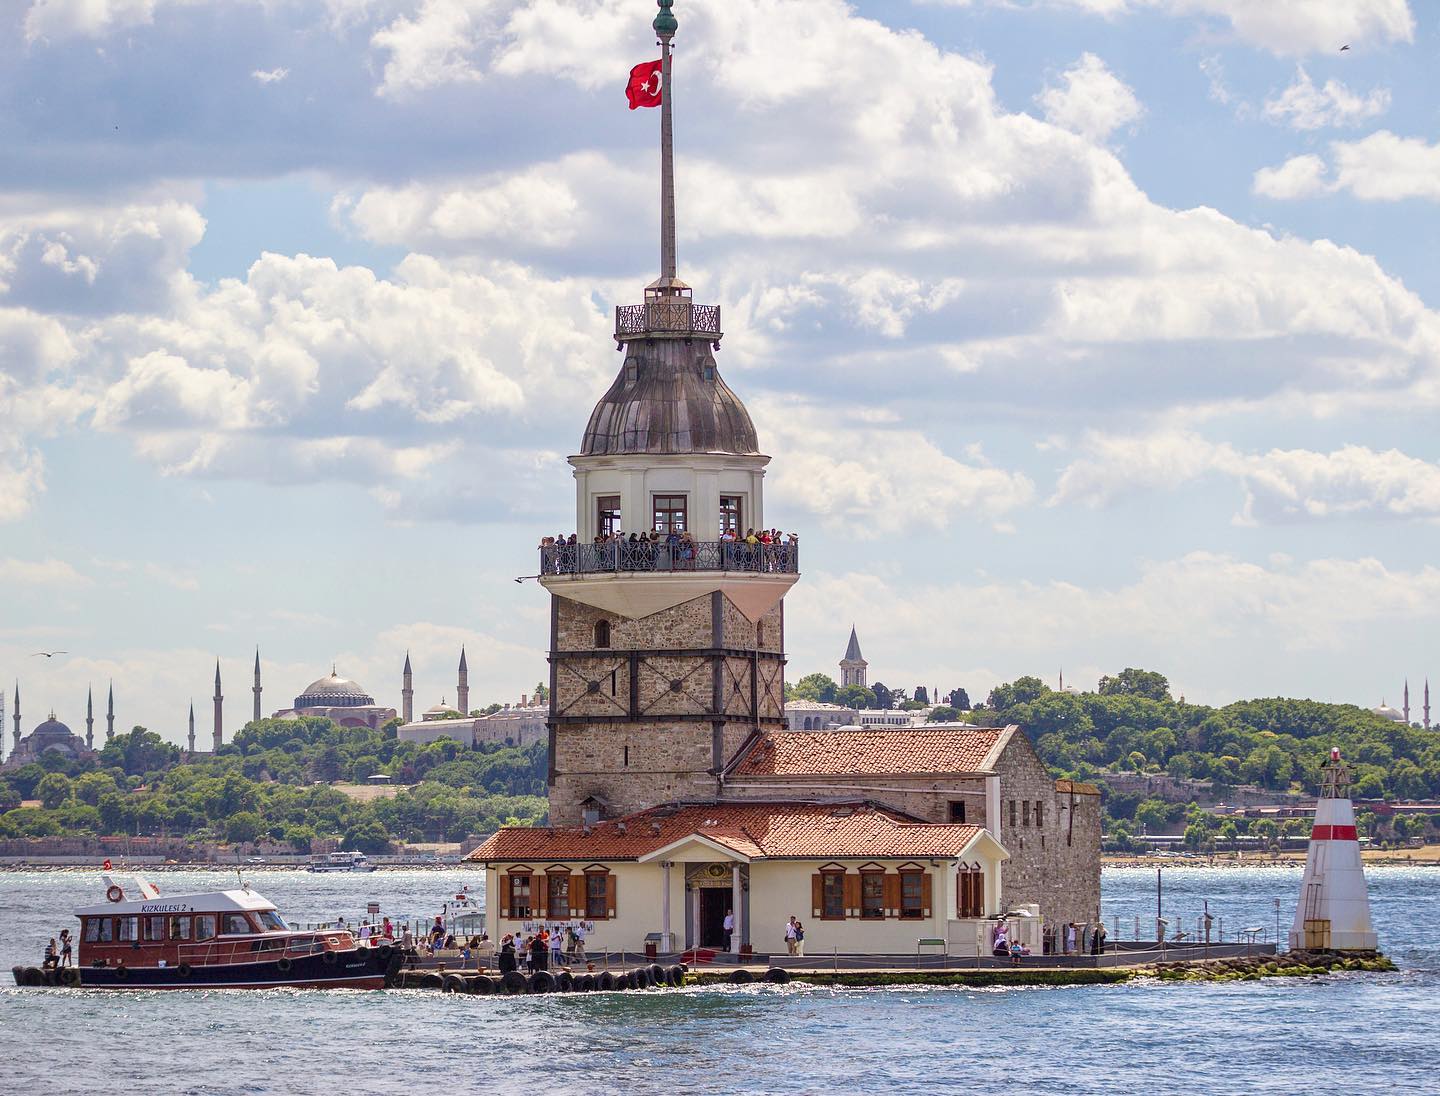 The Maiden's Tower, also known as Leander's Tower (Tower of Leandros) since the medieval Byzantine period, is a tower lying on a small islet located at the southern entrance of the Bosphorus strait 200 m from the coast of Üsküdar in Istanbul, Turkey.
.
.
#istanbul #turkey #türkiye #üsküdar #towerofleandros #leanderstower #lighthouse #hagiasophia #bluemosque #jamesbondislands #constantinople #jamesbond #sightseeing #cloudy #istanbulturkey #wonderful_places #beautifulplaces #canon #travel #maidenstower #europe #europetravel #europe_pics #traveling #travelblog #travelblogger #turkiye #istanbulbestpictures #topkapipalace #topkapi